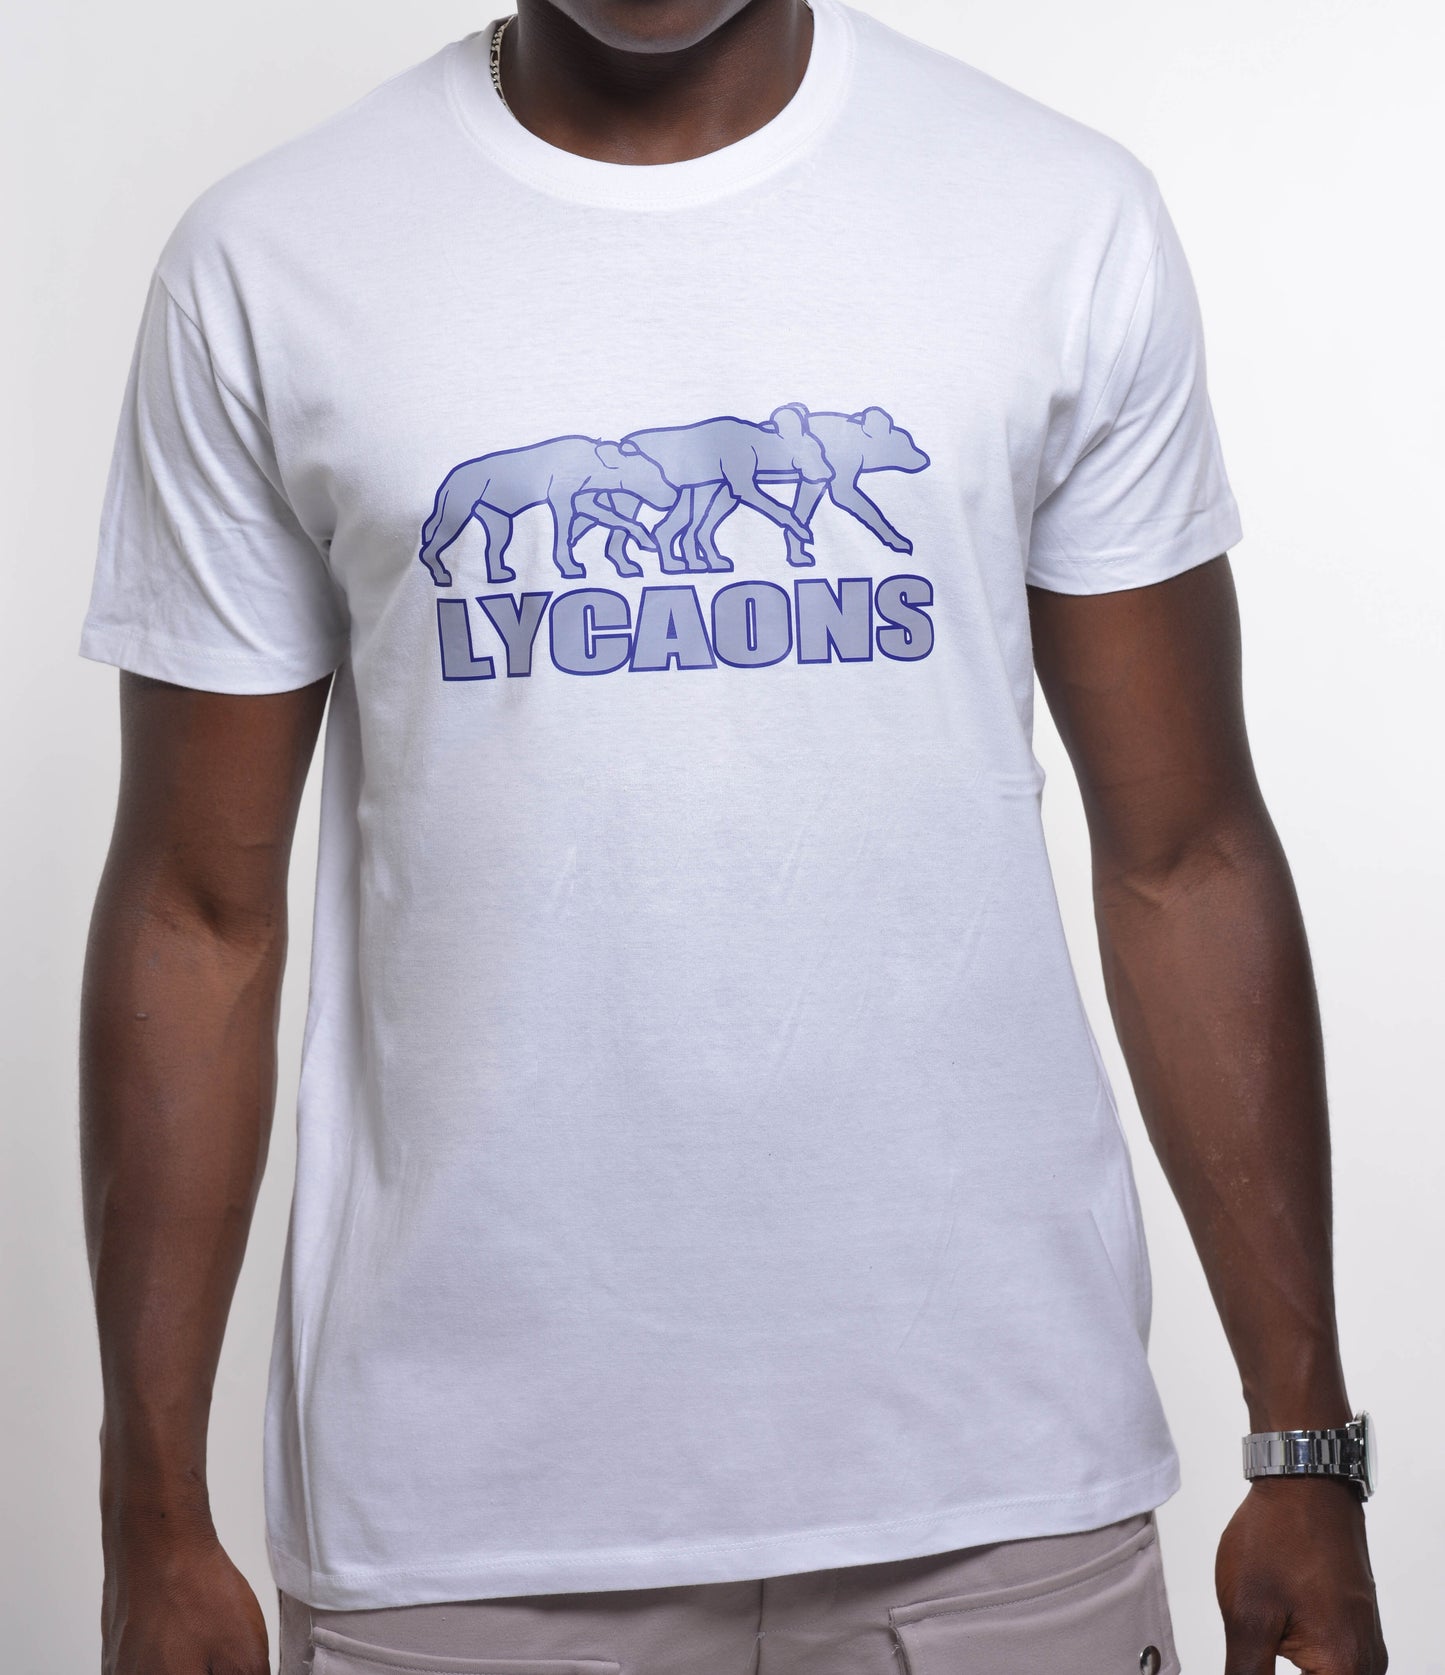 T-shirt Lycaons Blue and grey